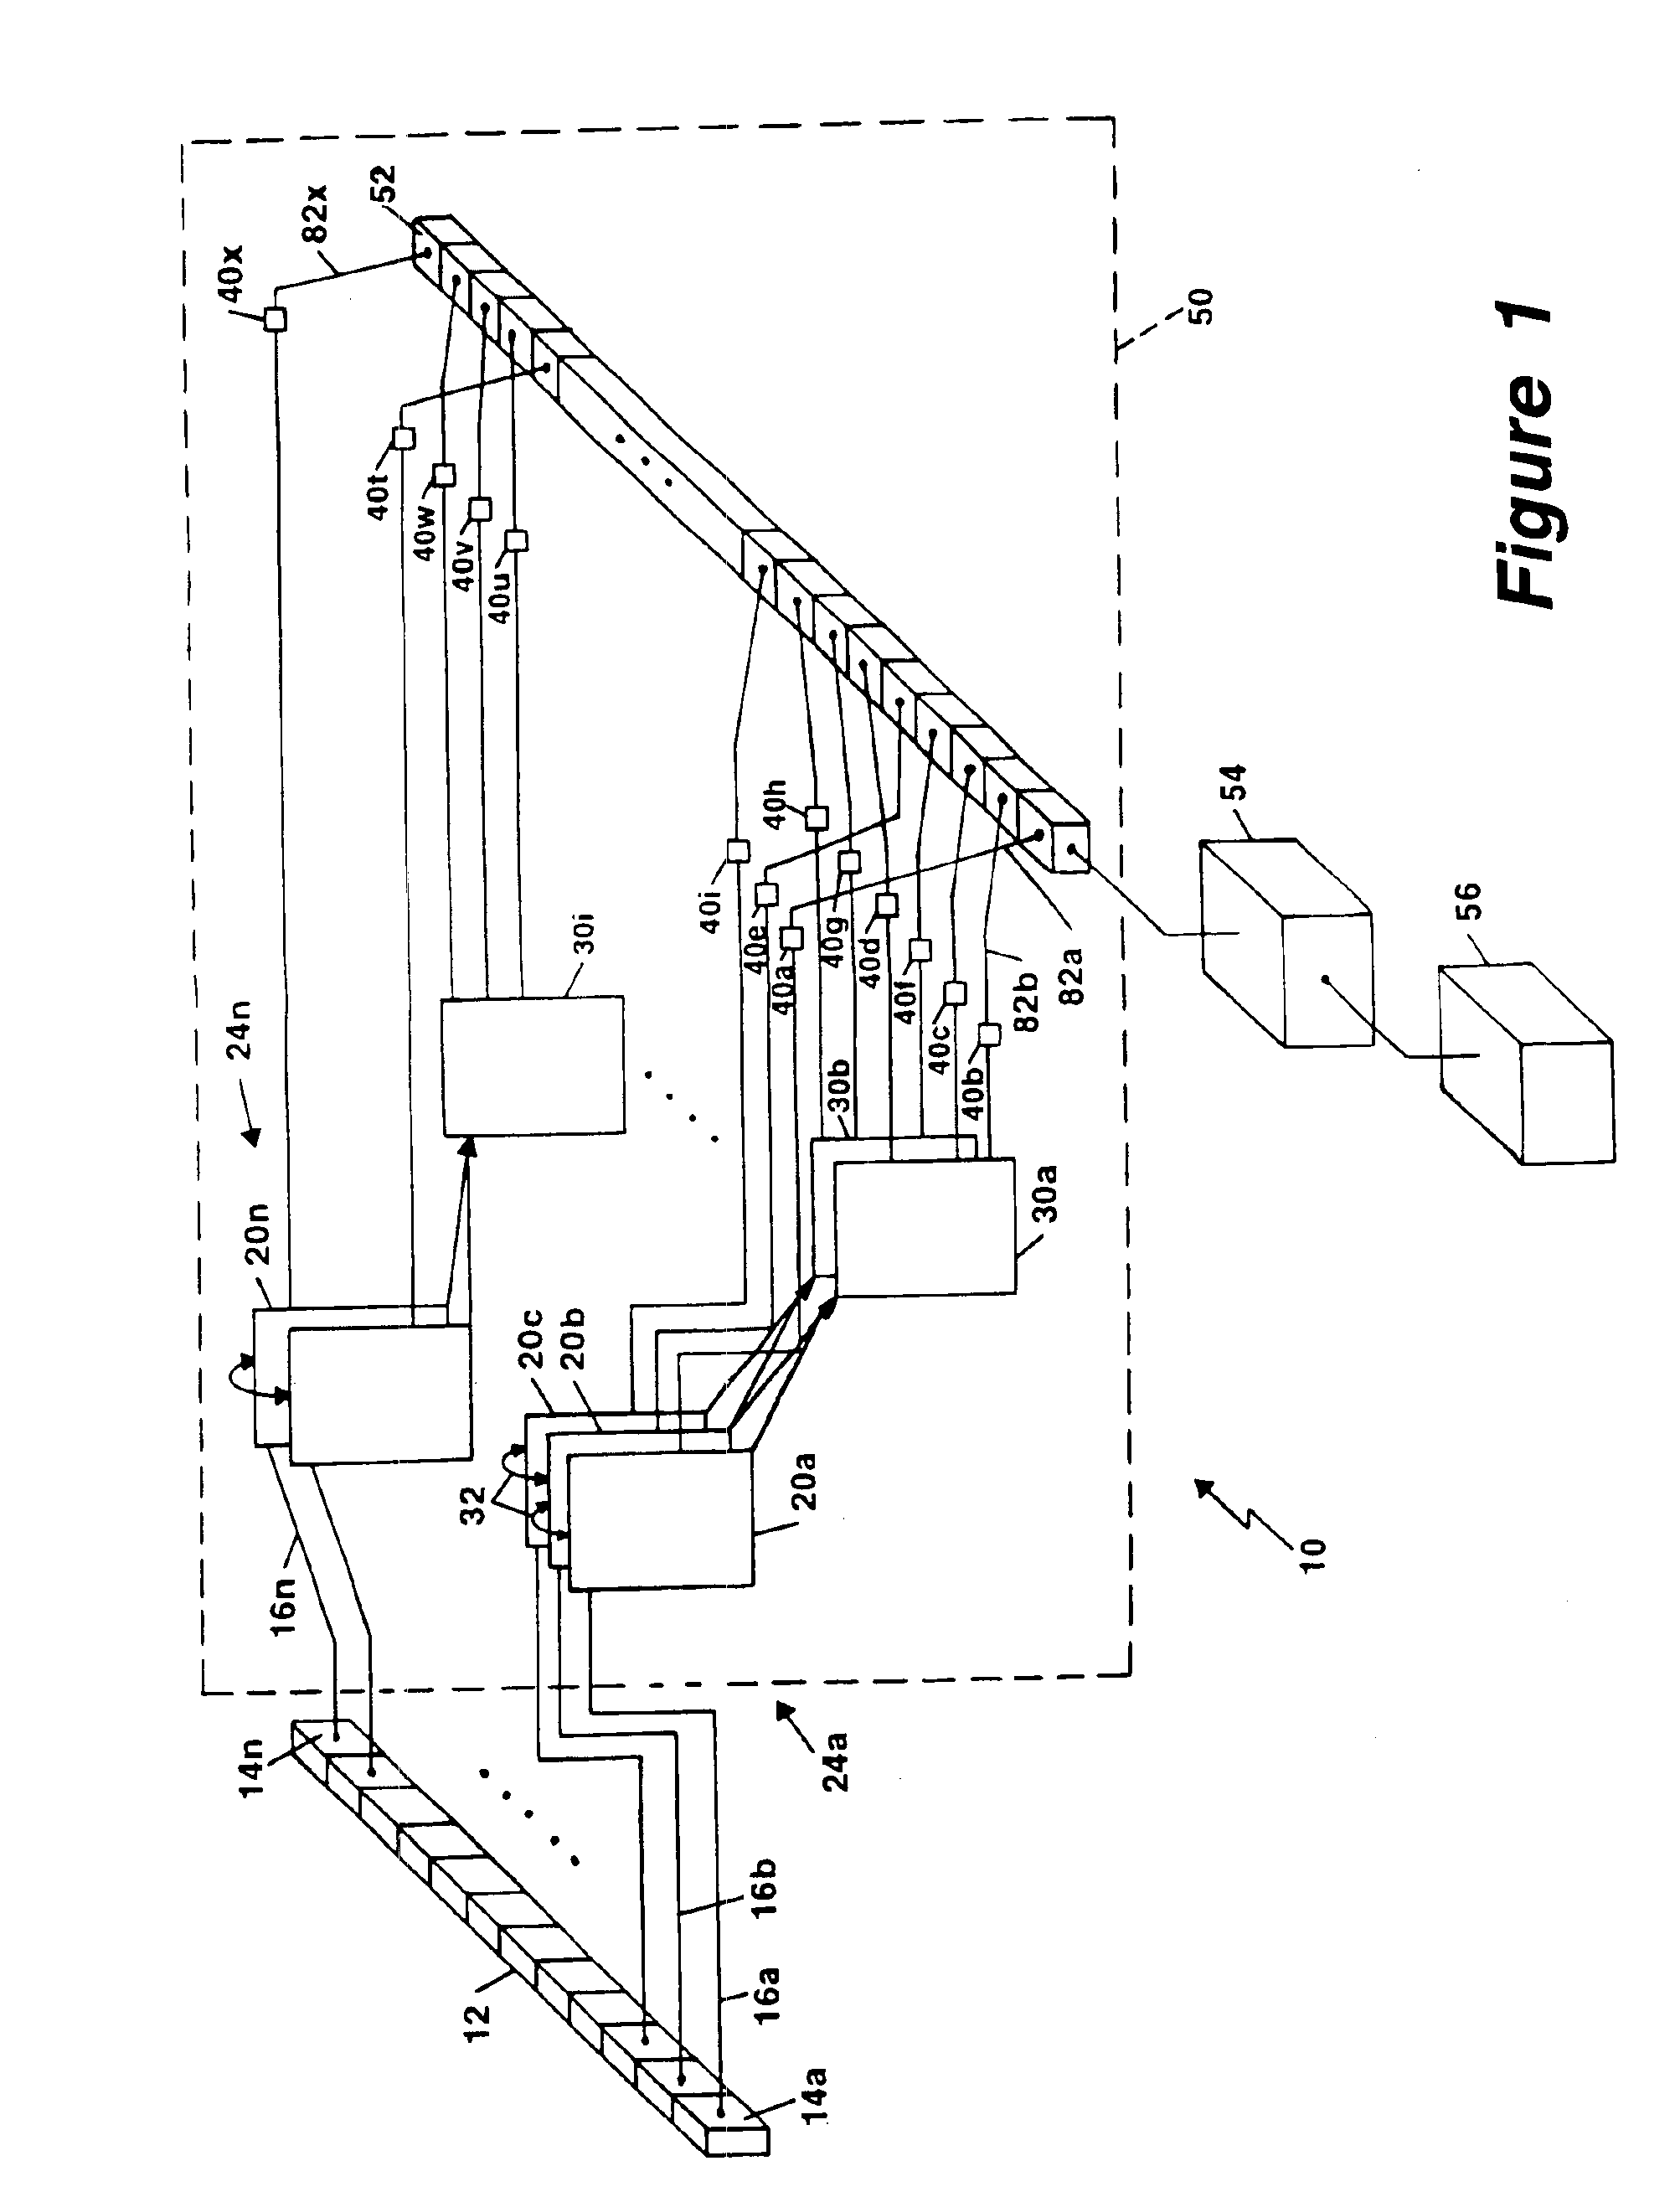 Methods and apparatus for improving resolution and reducing the effects of signal coupling in an electronic imager